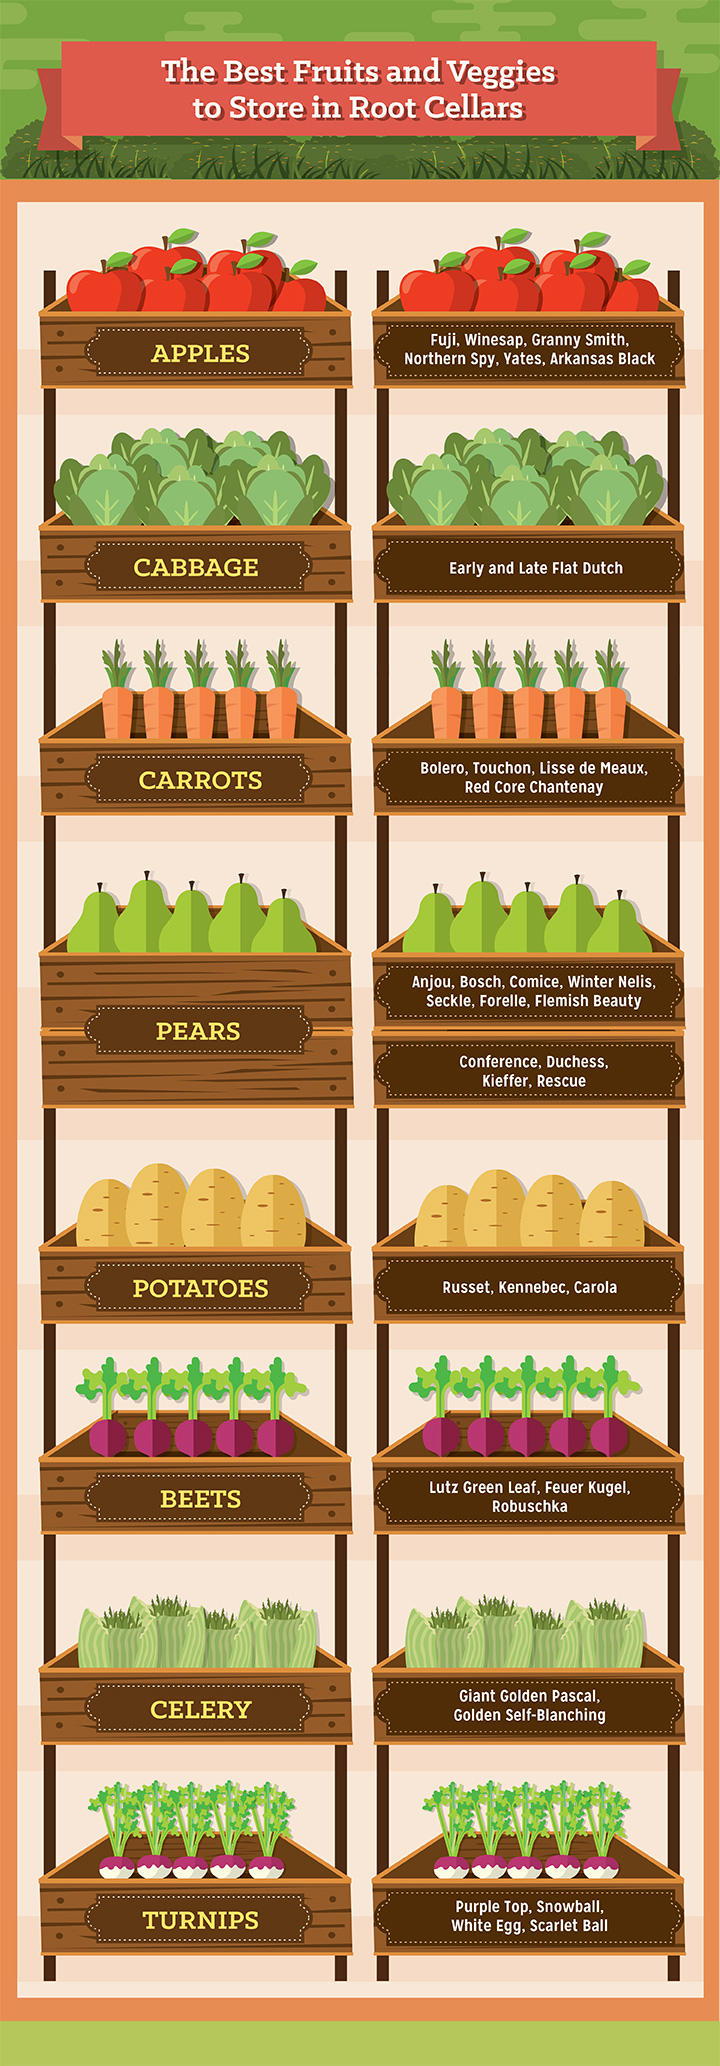 The Best Fruits and Veggies to Store in Root Cellars